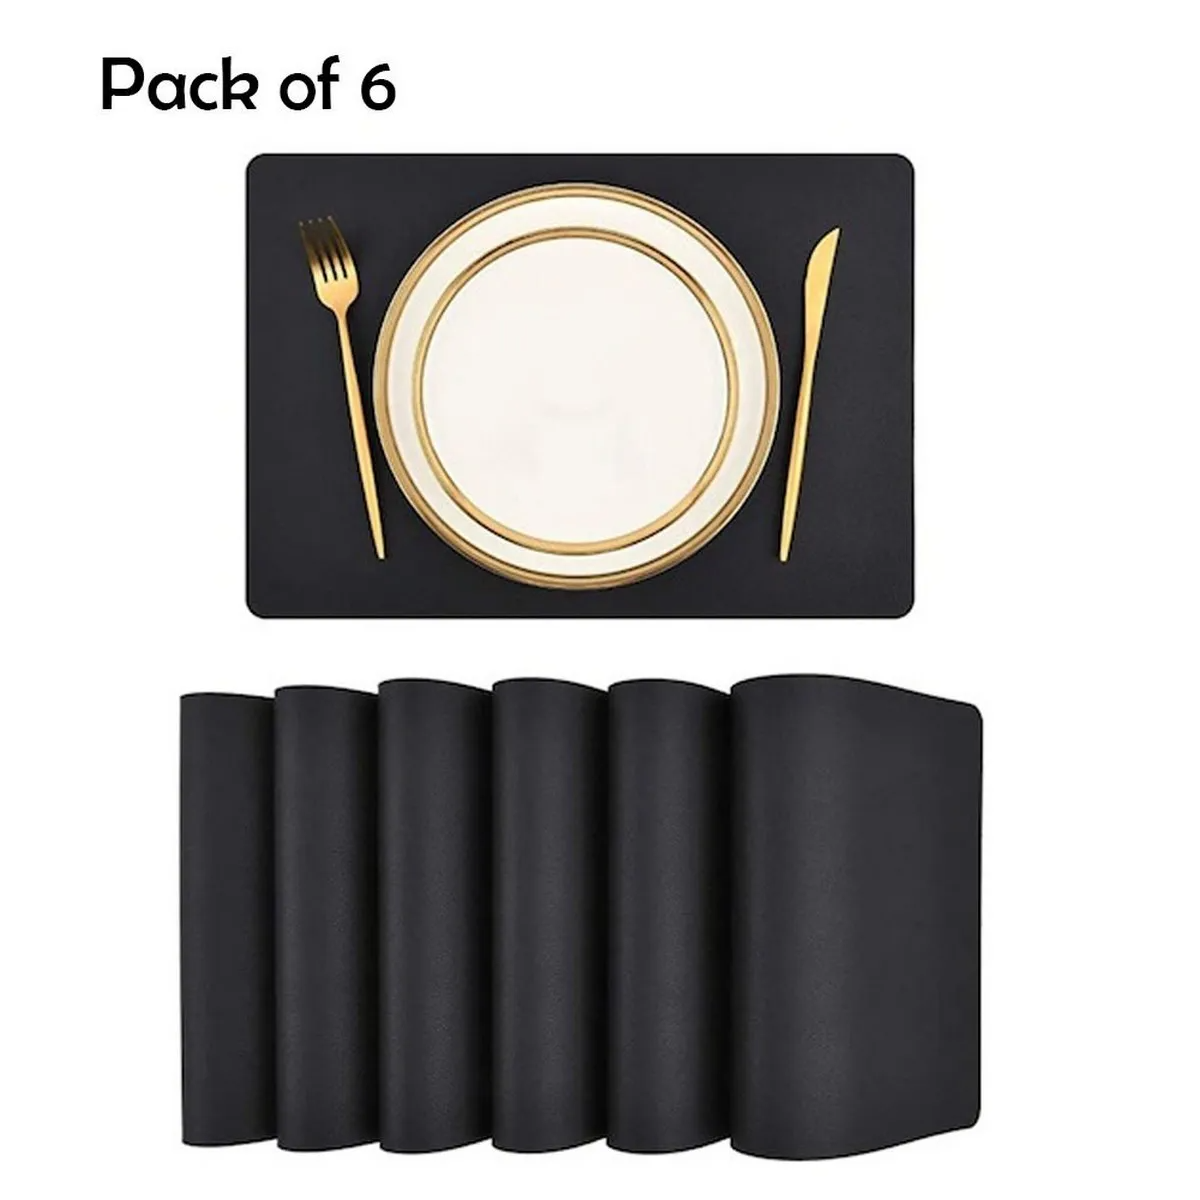 Relaxsit Black PU Leather Placemats Set of 4 & 6 Waterproof Heat Resistant Durable Non-Slip Table Mats for Kitchen Dining Table, restaurants, and commercial kitchen use.